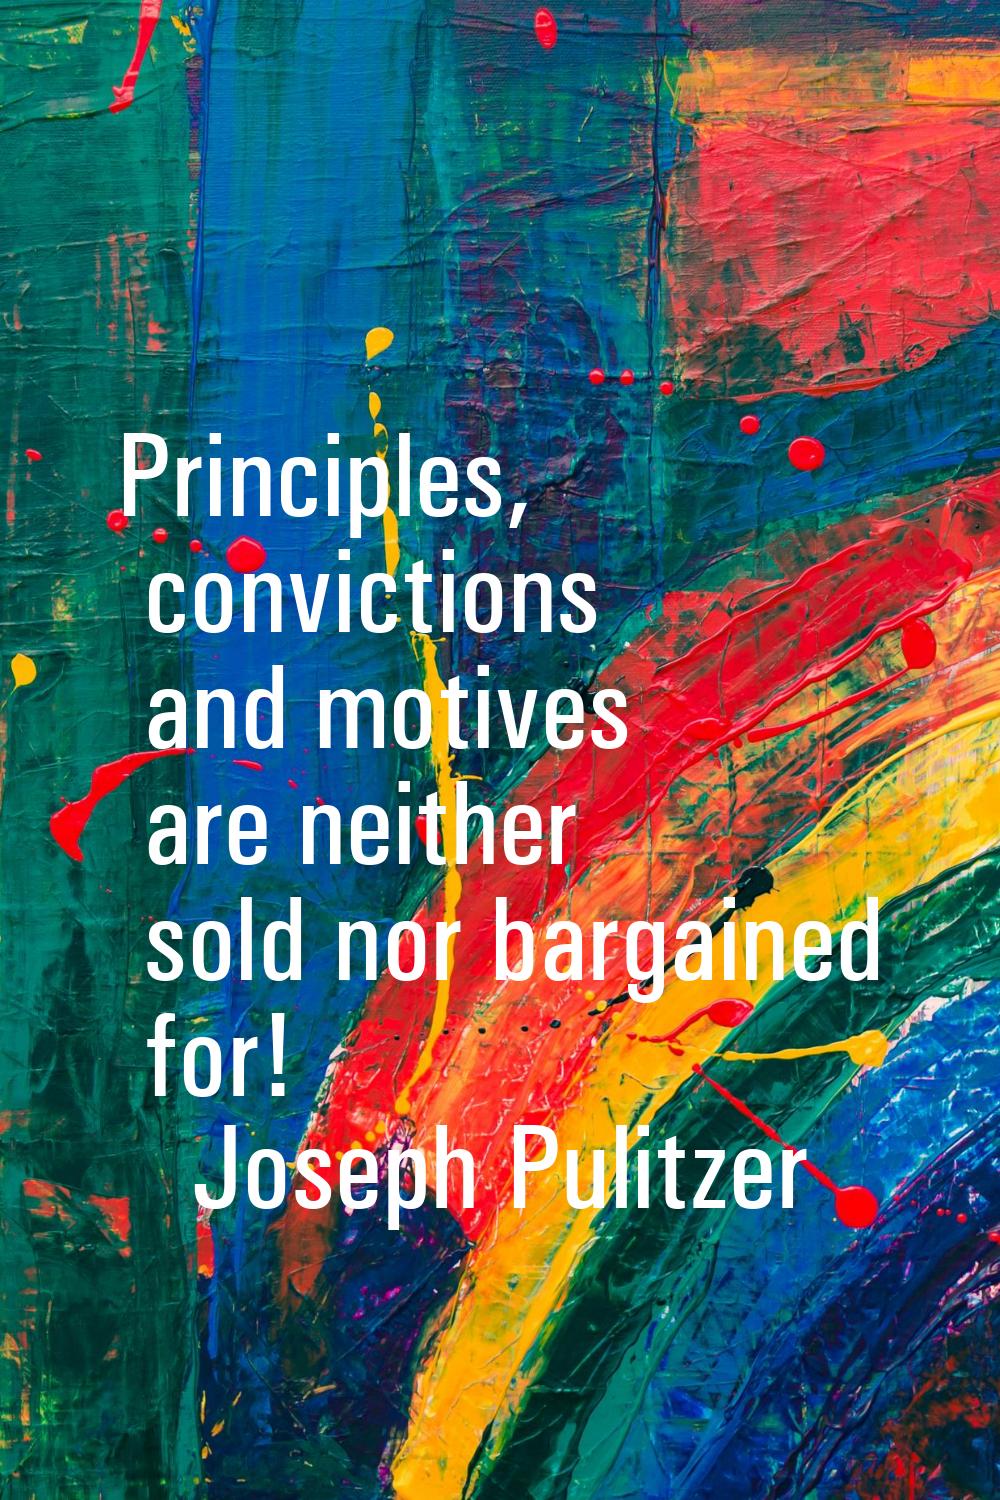 Principles, convictions and motives are neither sold nor bargained for!